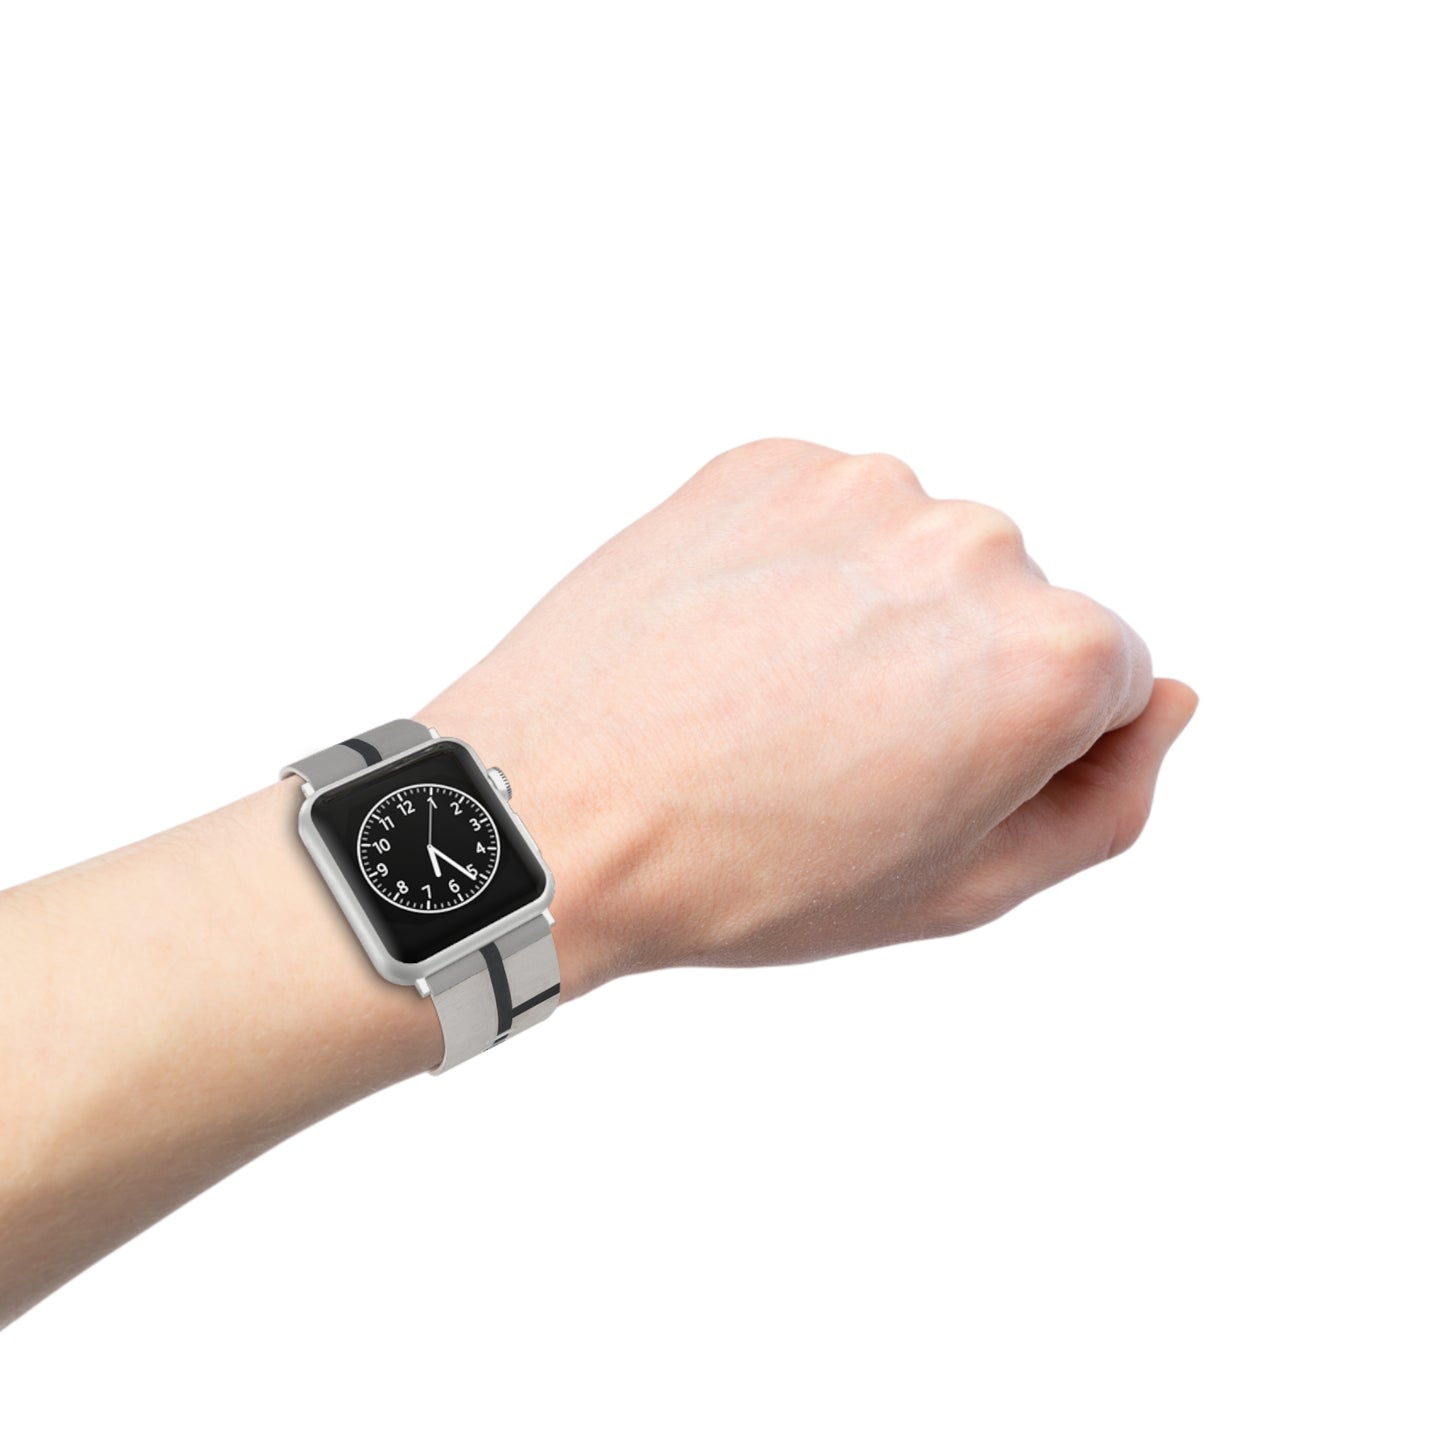 THEO VAN DOESBURG - SIMULTANEOUS COMPOSITION - ART WATCH BAND FOR APPLE WATCH